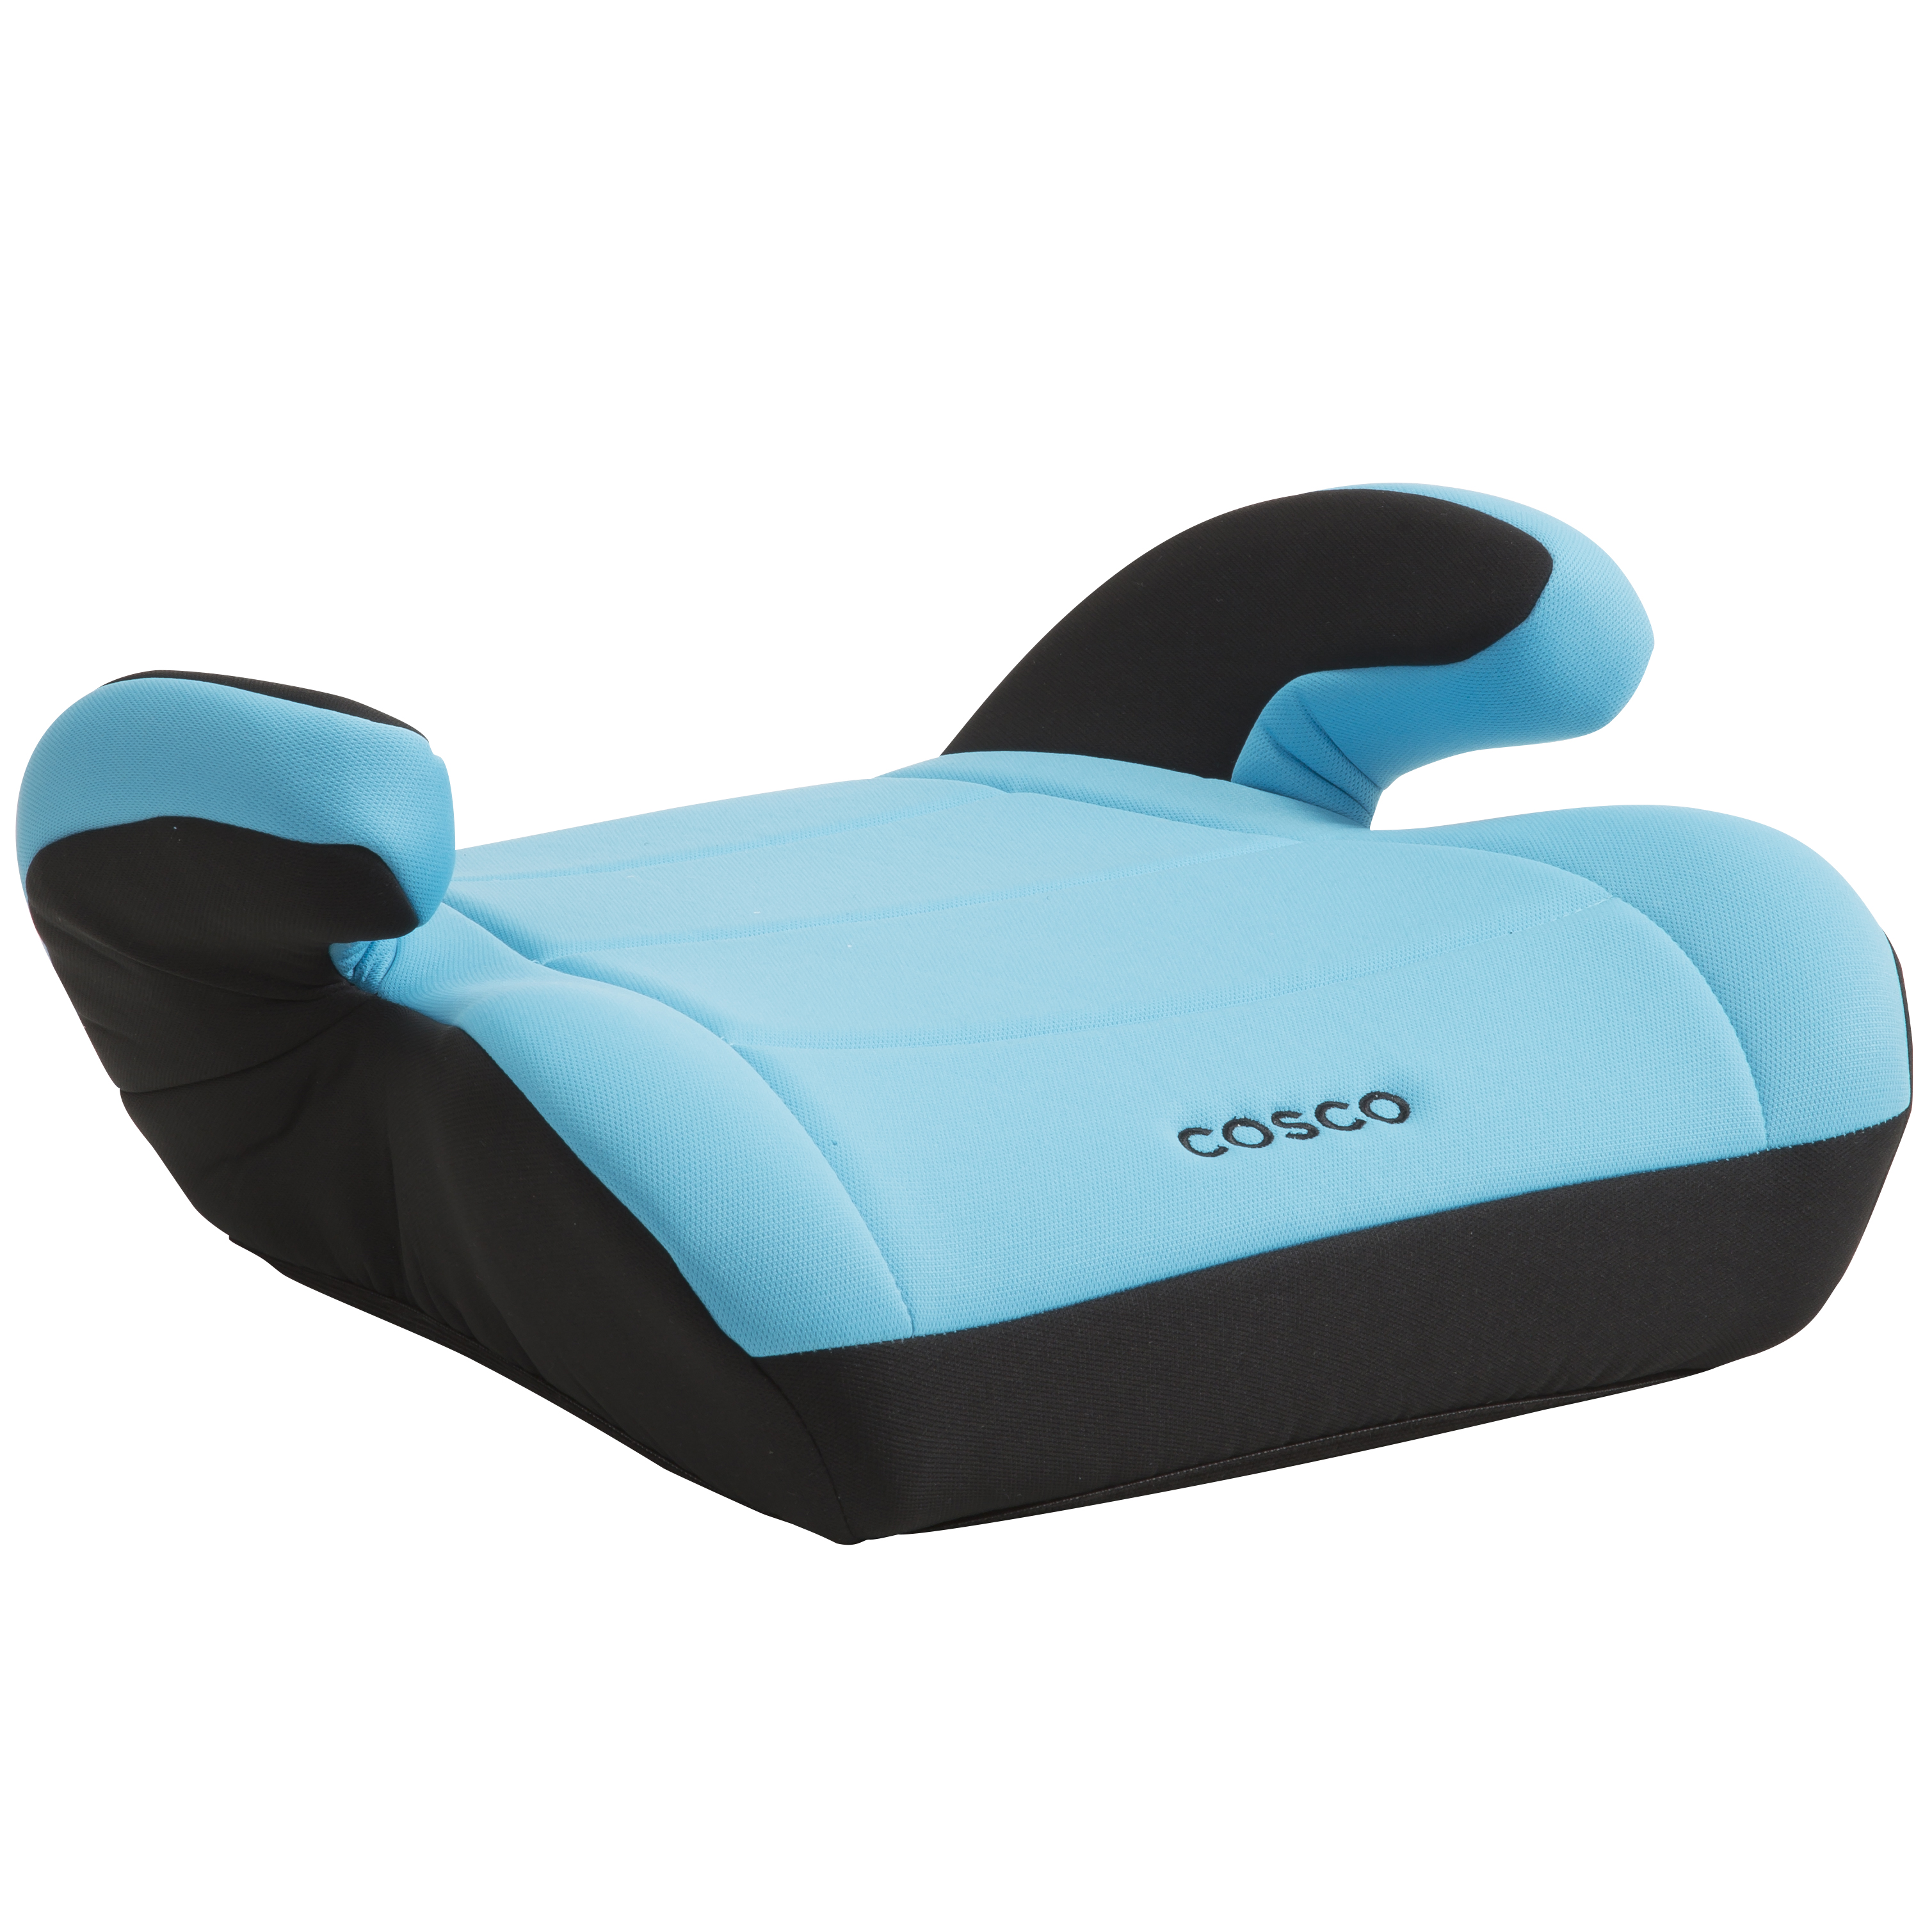 Cosco Topside Booster Car Seat, Turquoise - image 3 of 5